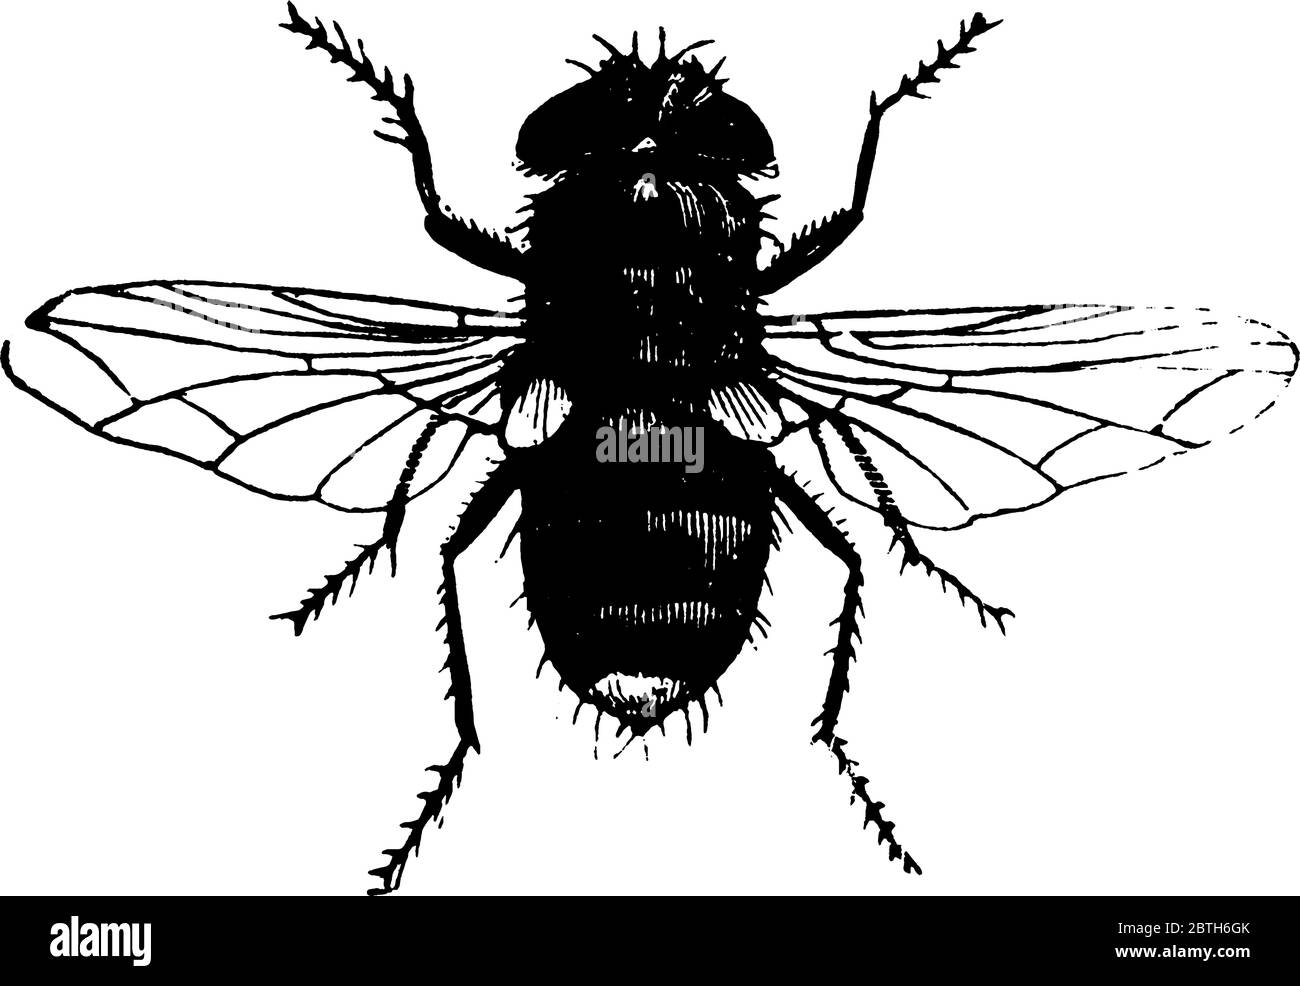 Exorista flavicauda species, yellow-tailed Tachinid, with dark mottled markings on its head, thorax and abdomen and radial veins crossing in its wings Stock Vector